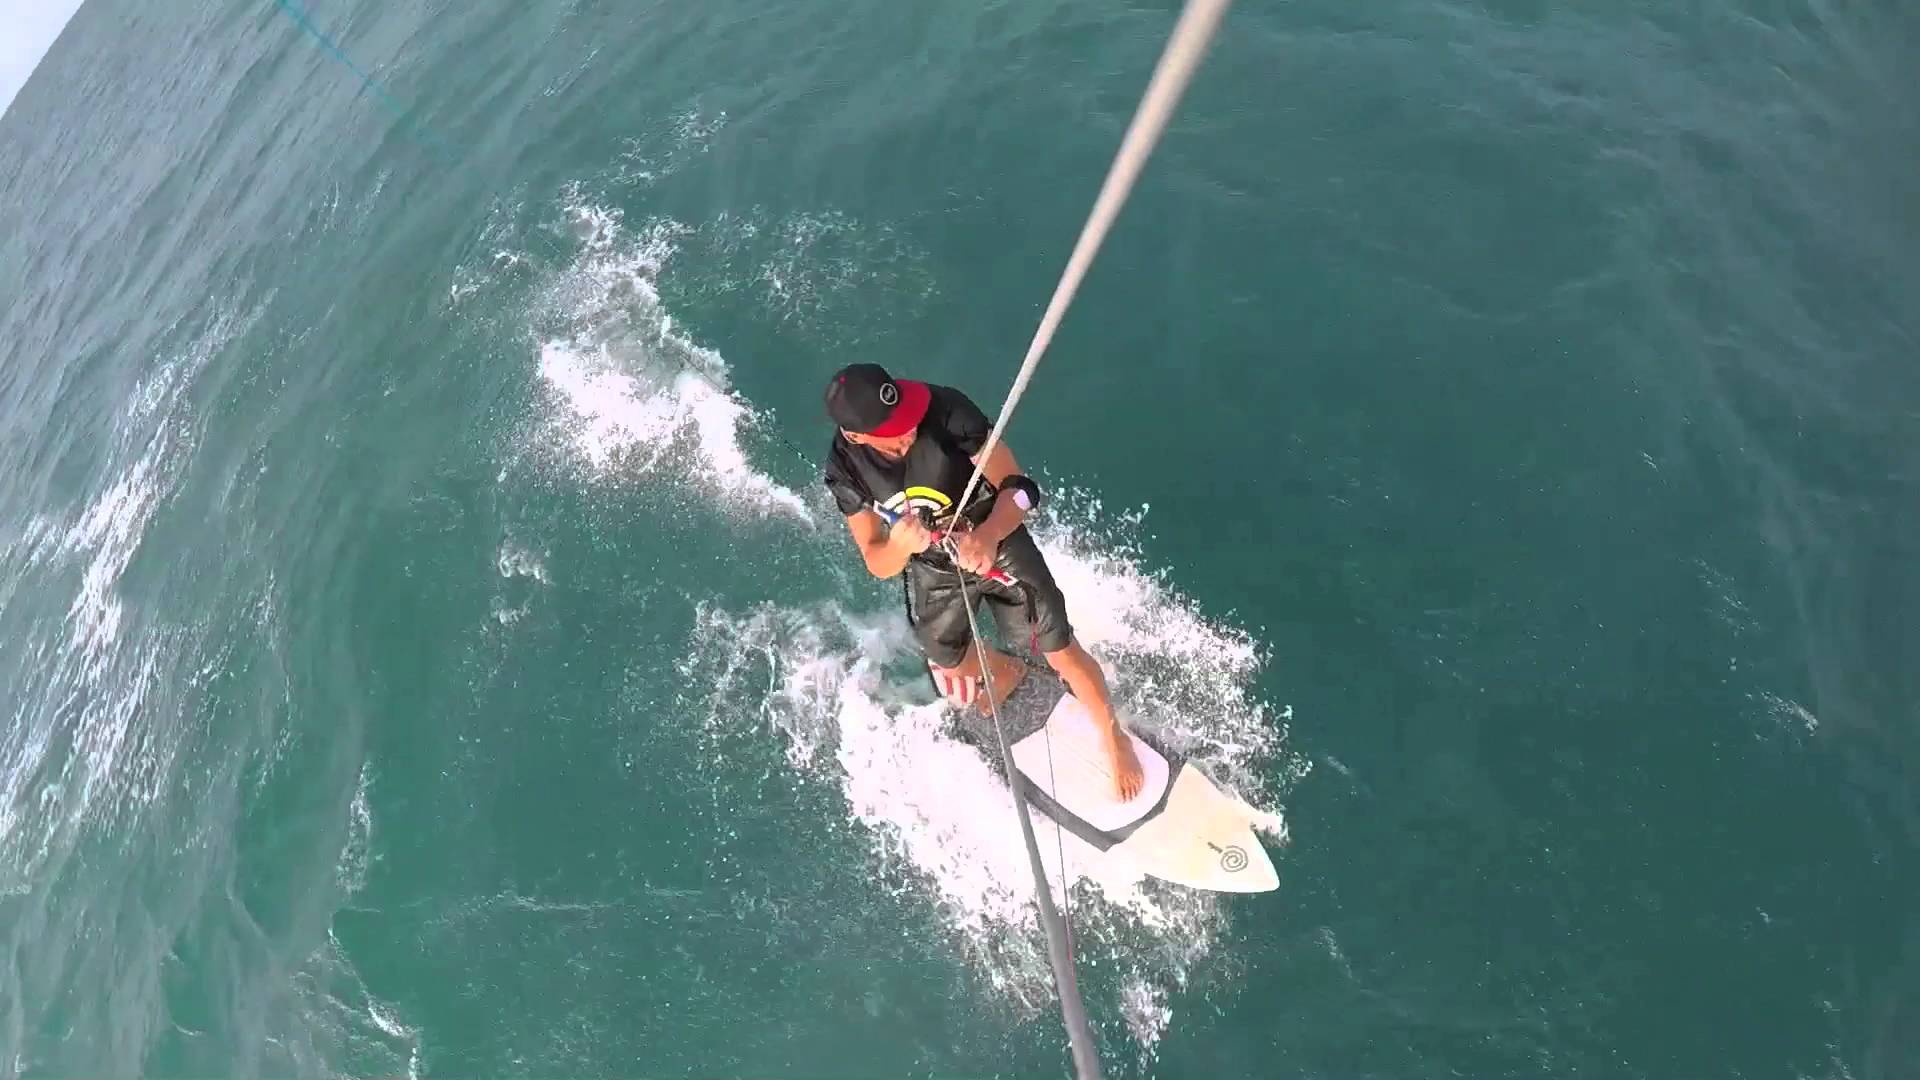 august in cabarete with uncharte - August in Cabarete with Uncharted Kite Sessions